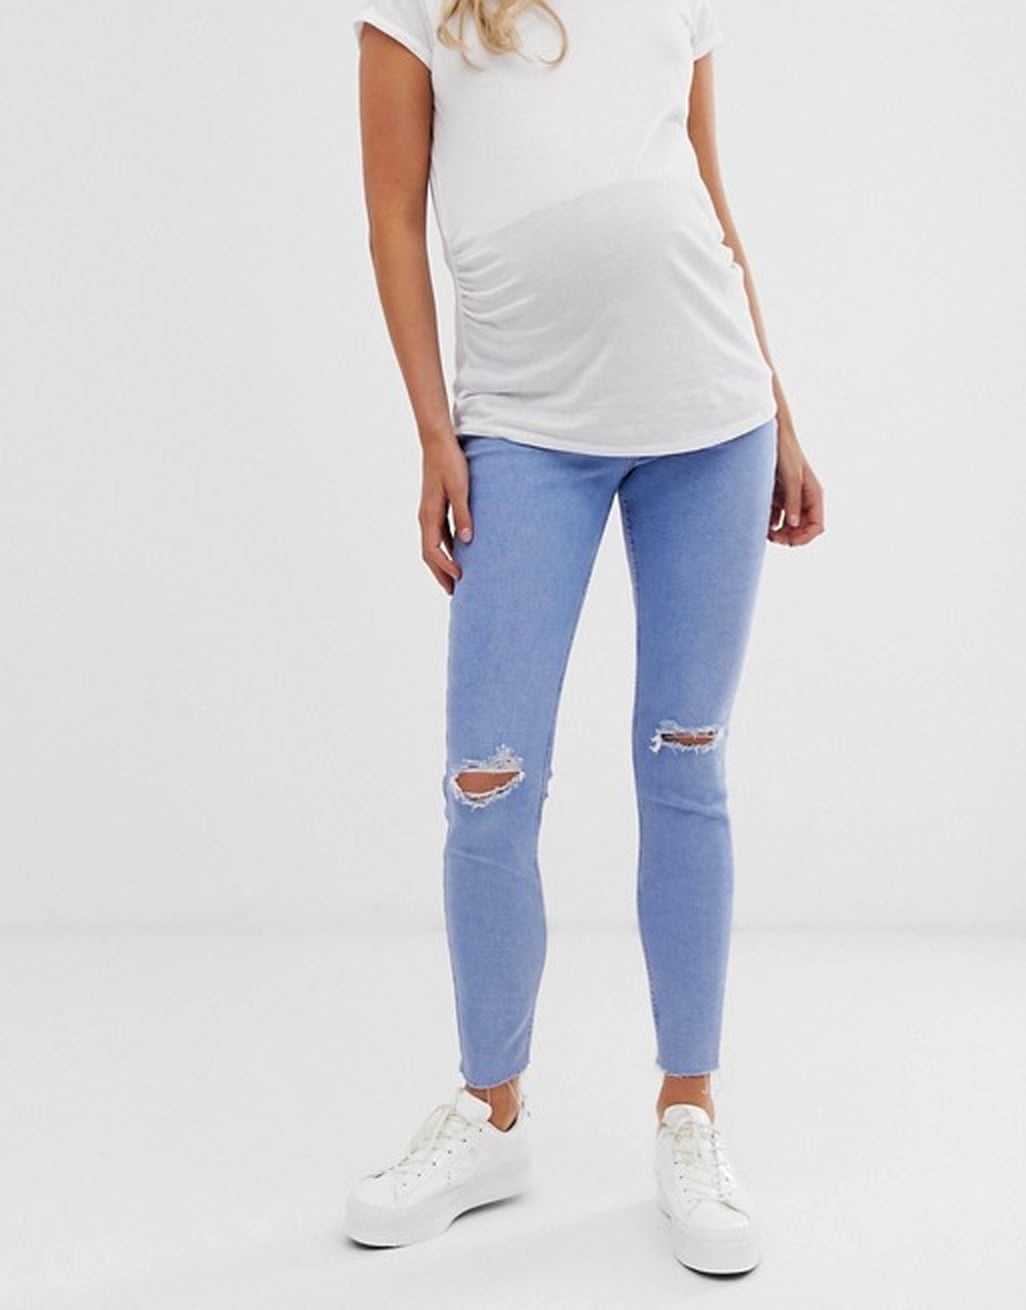 Best Maternity Clothes at ASOS Under 50 | POPSUGAR Family